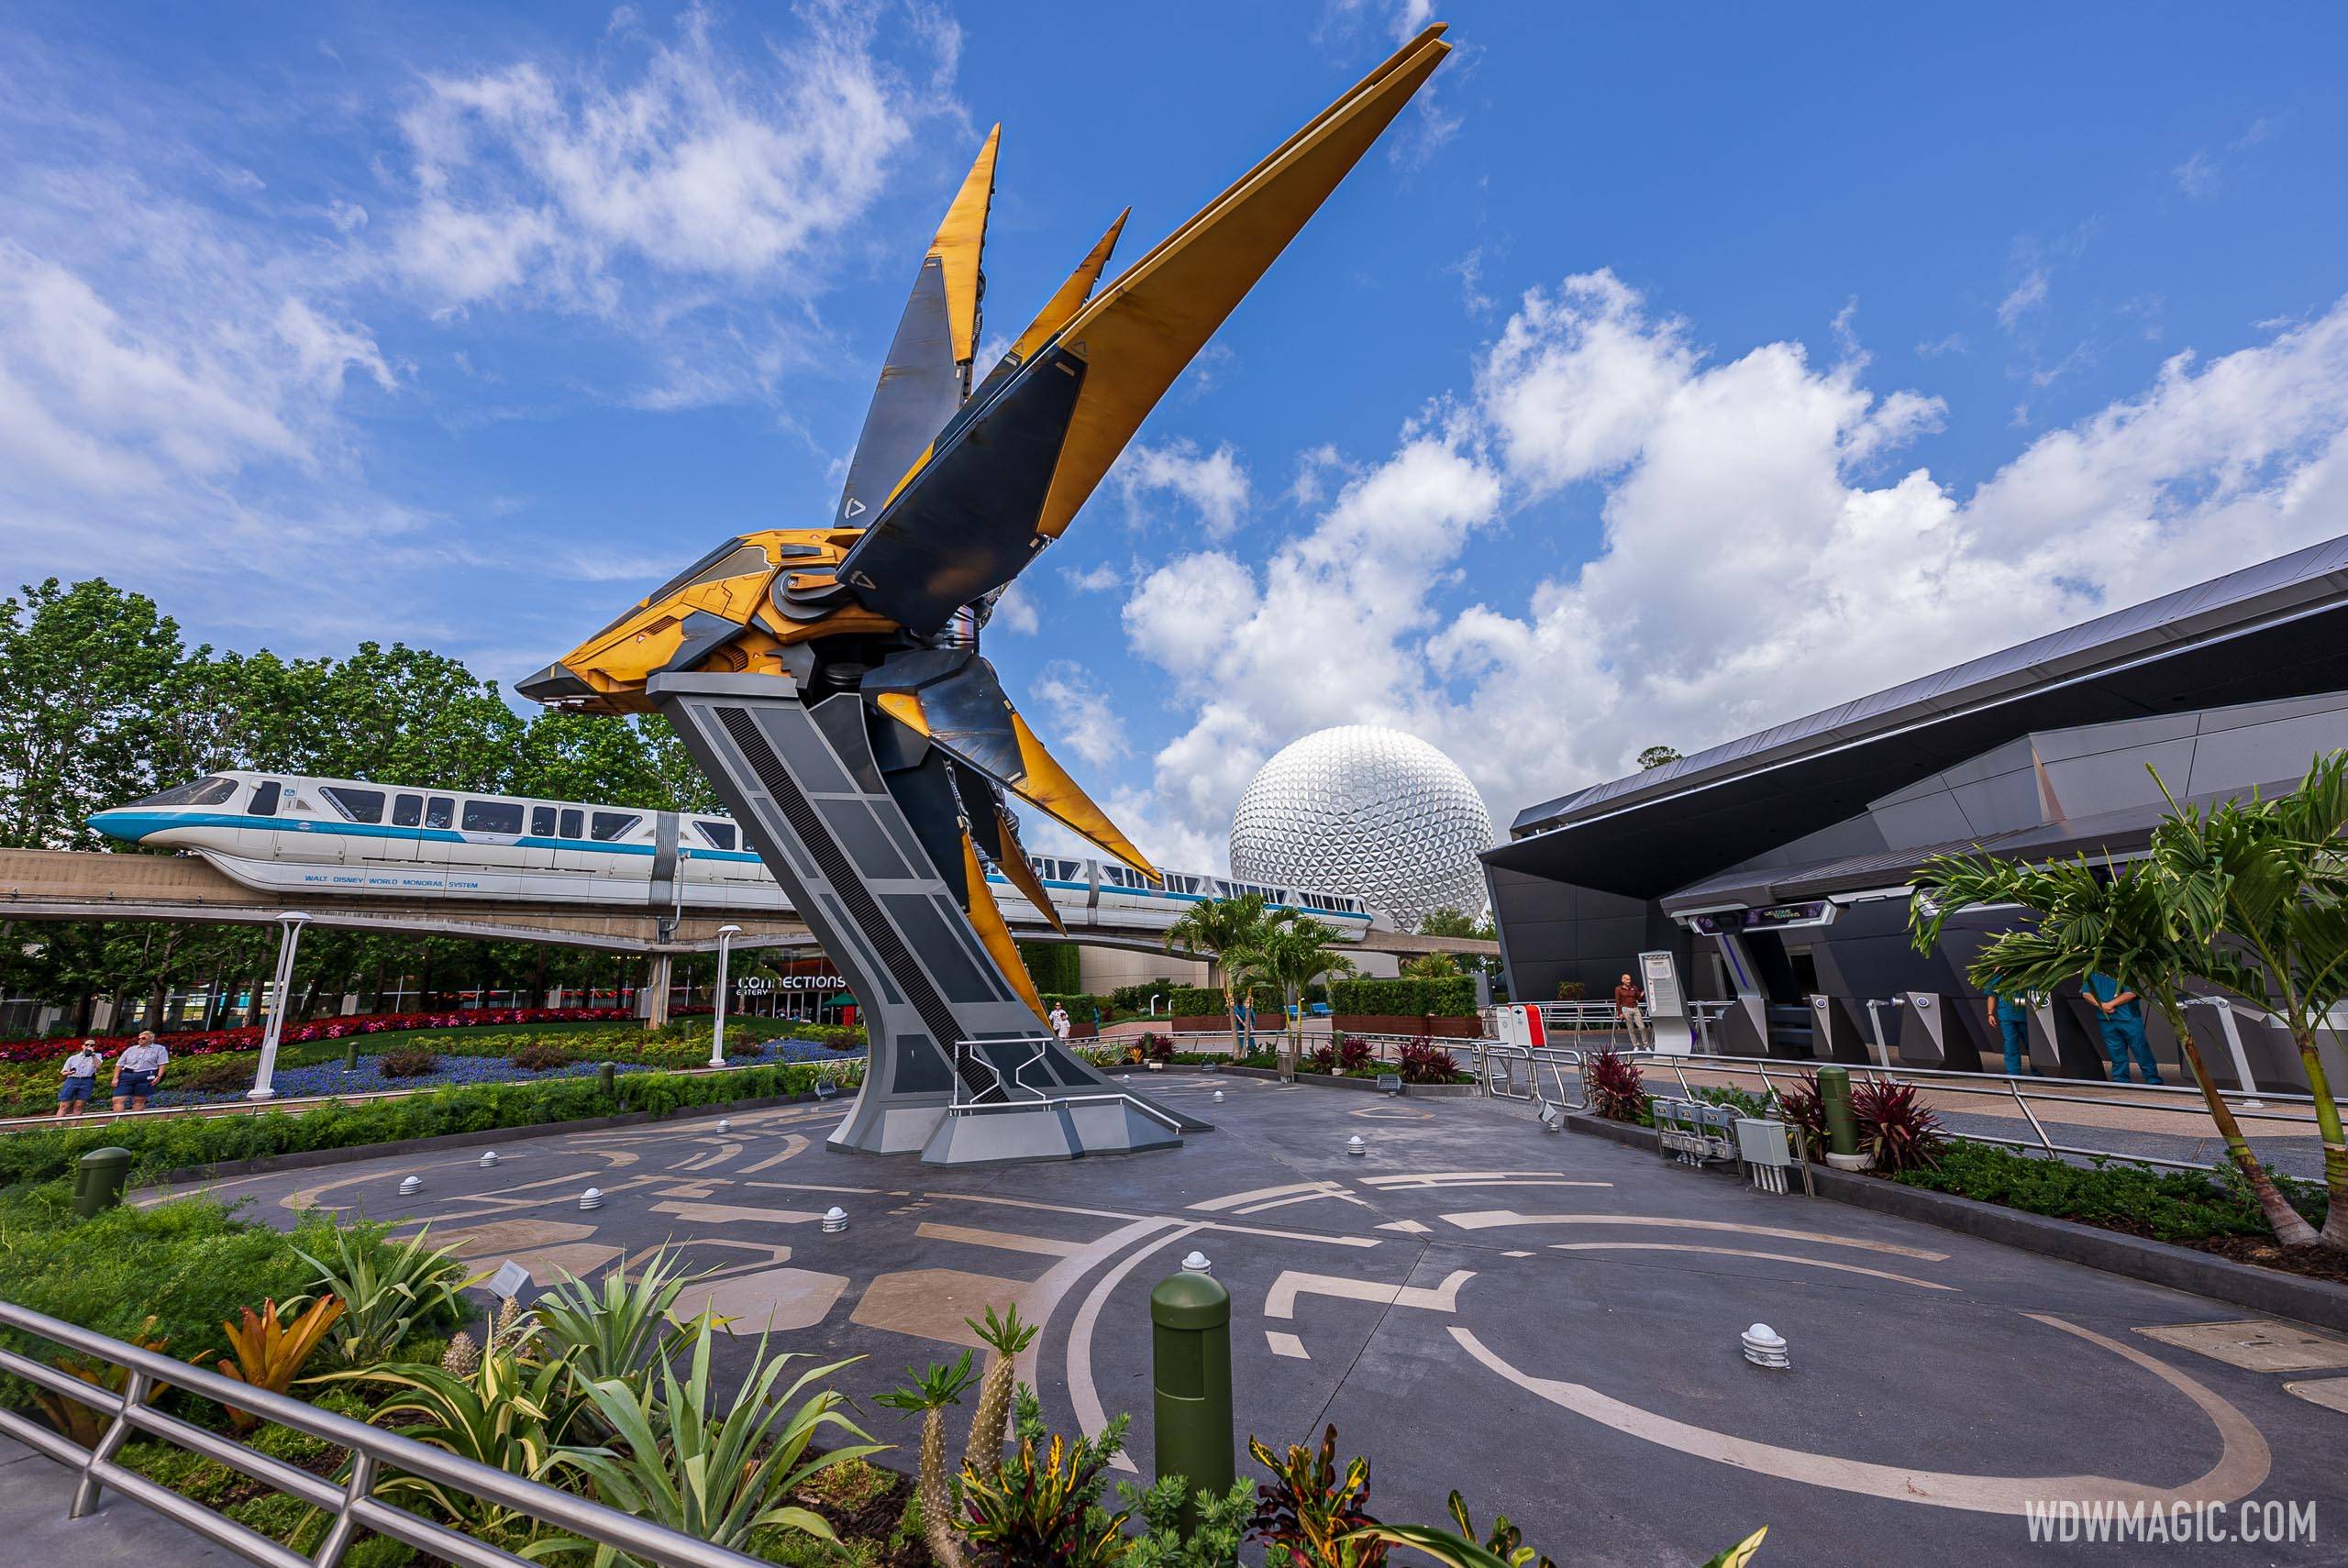 Nova Corps Starblaster with Spaceship Earth and Monorail passing by